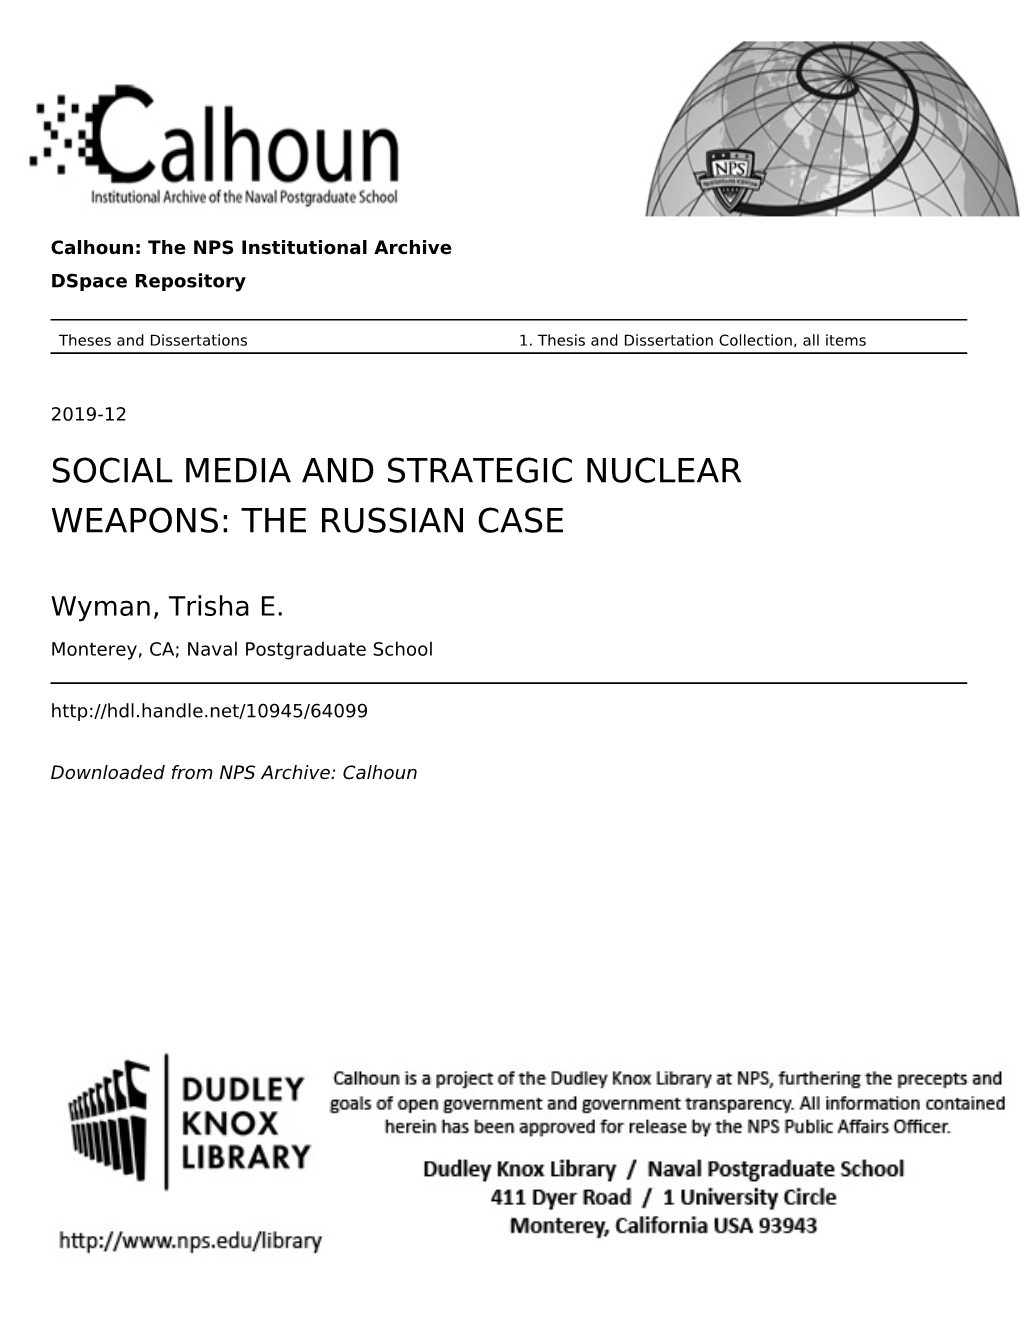 Social Media and Strategic Nuclear Weapons: the Russian Case